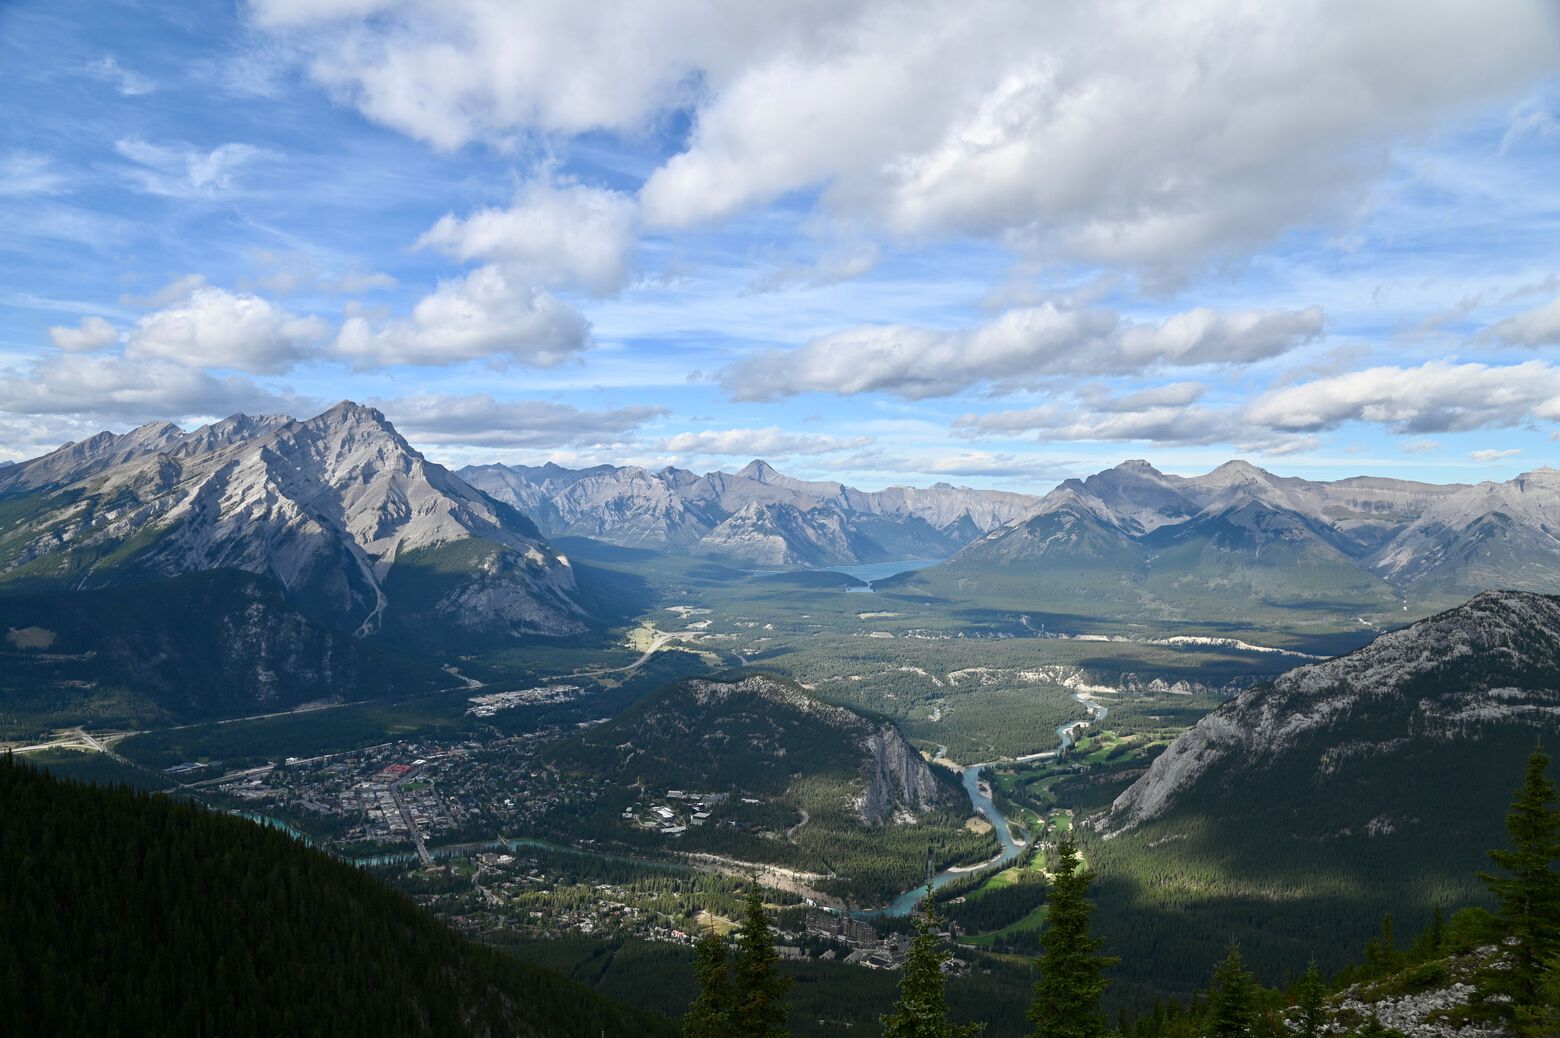 The view from the top of Sulphur Mountain in Banff National Park.